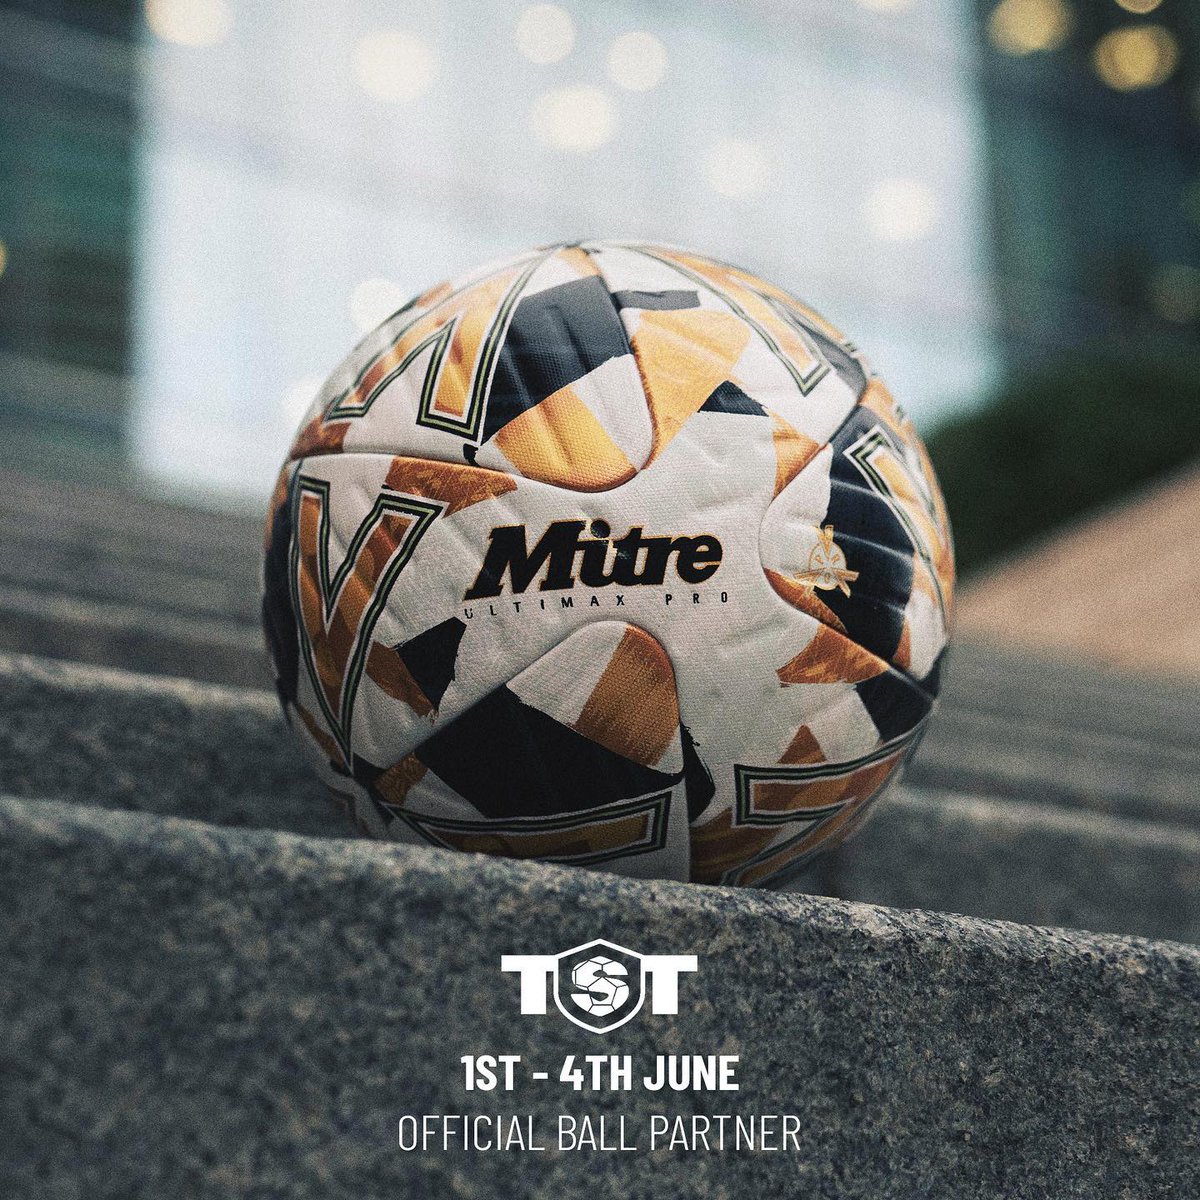 It’s all kicking off ⚽️
The Mitre Ultimax is going international, as the official match ball supplier of @TST7v7's  world 7-a-side championship in North Carolina. Keep your eyes peeled on tomorrow’s @SoccerAM for the official tournament ball.
 
@MitreSports #DifferentLeague